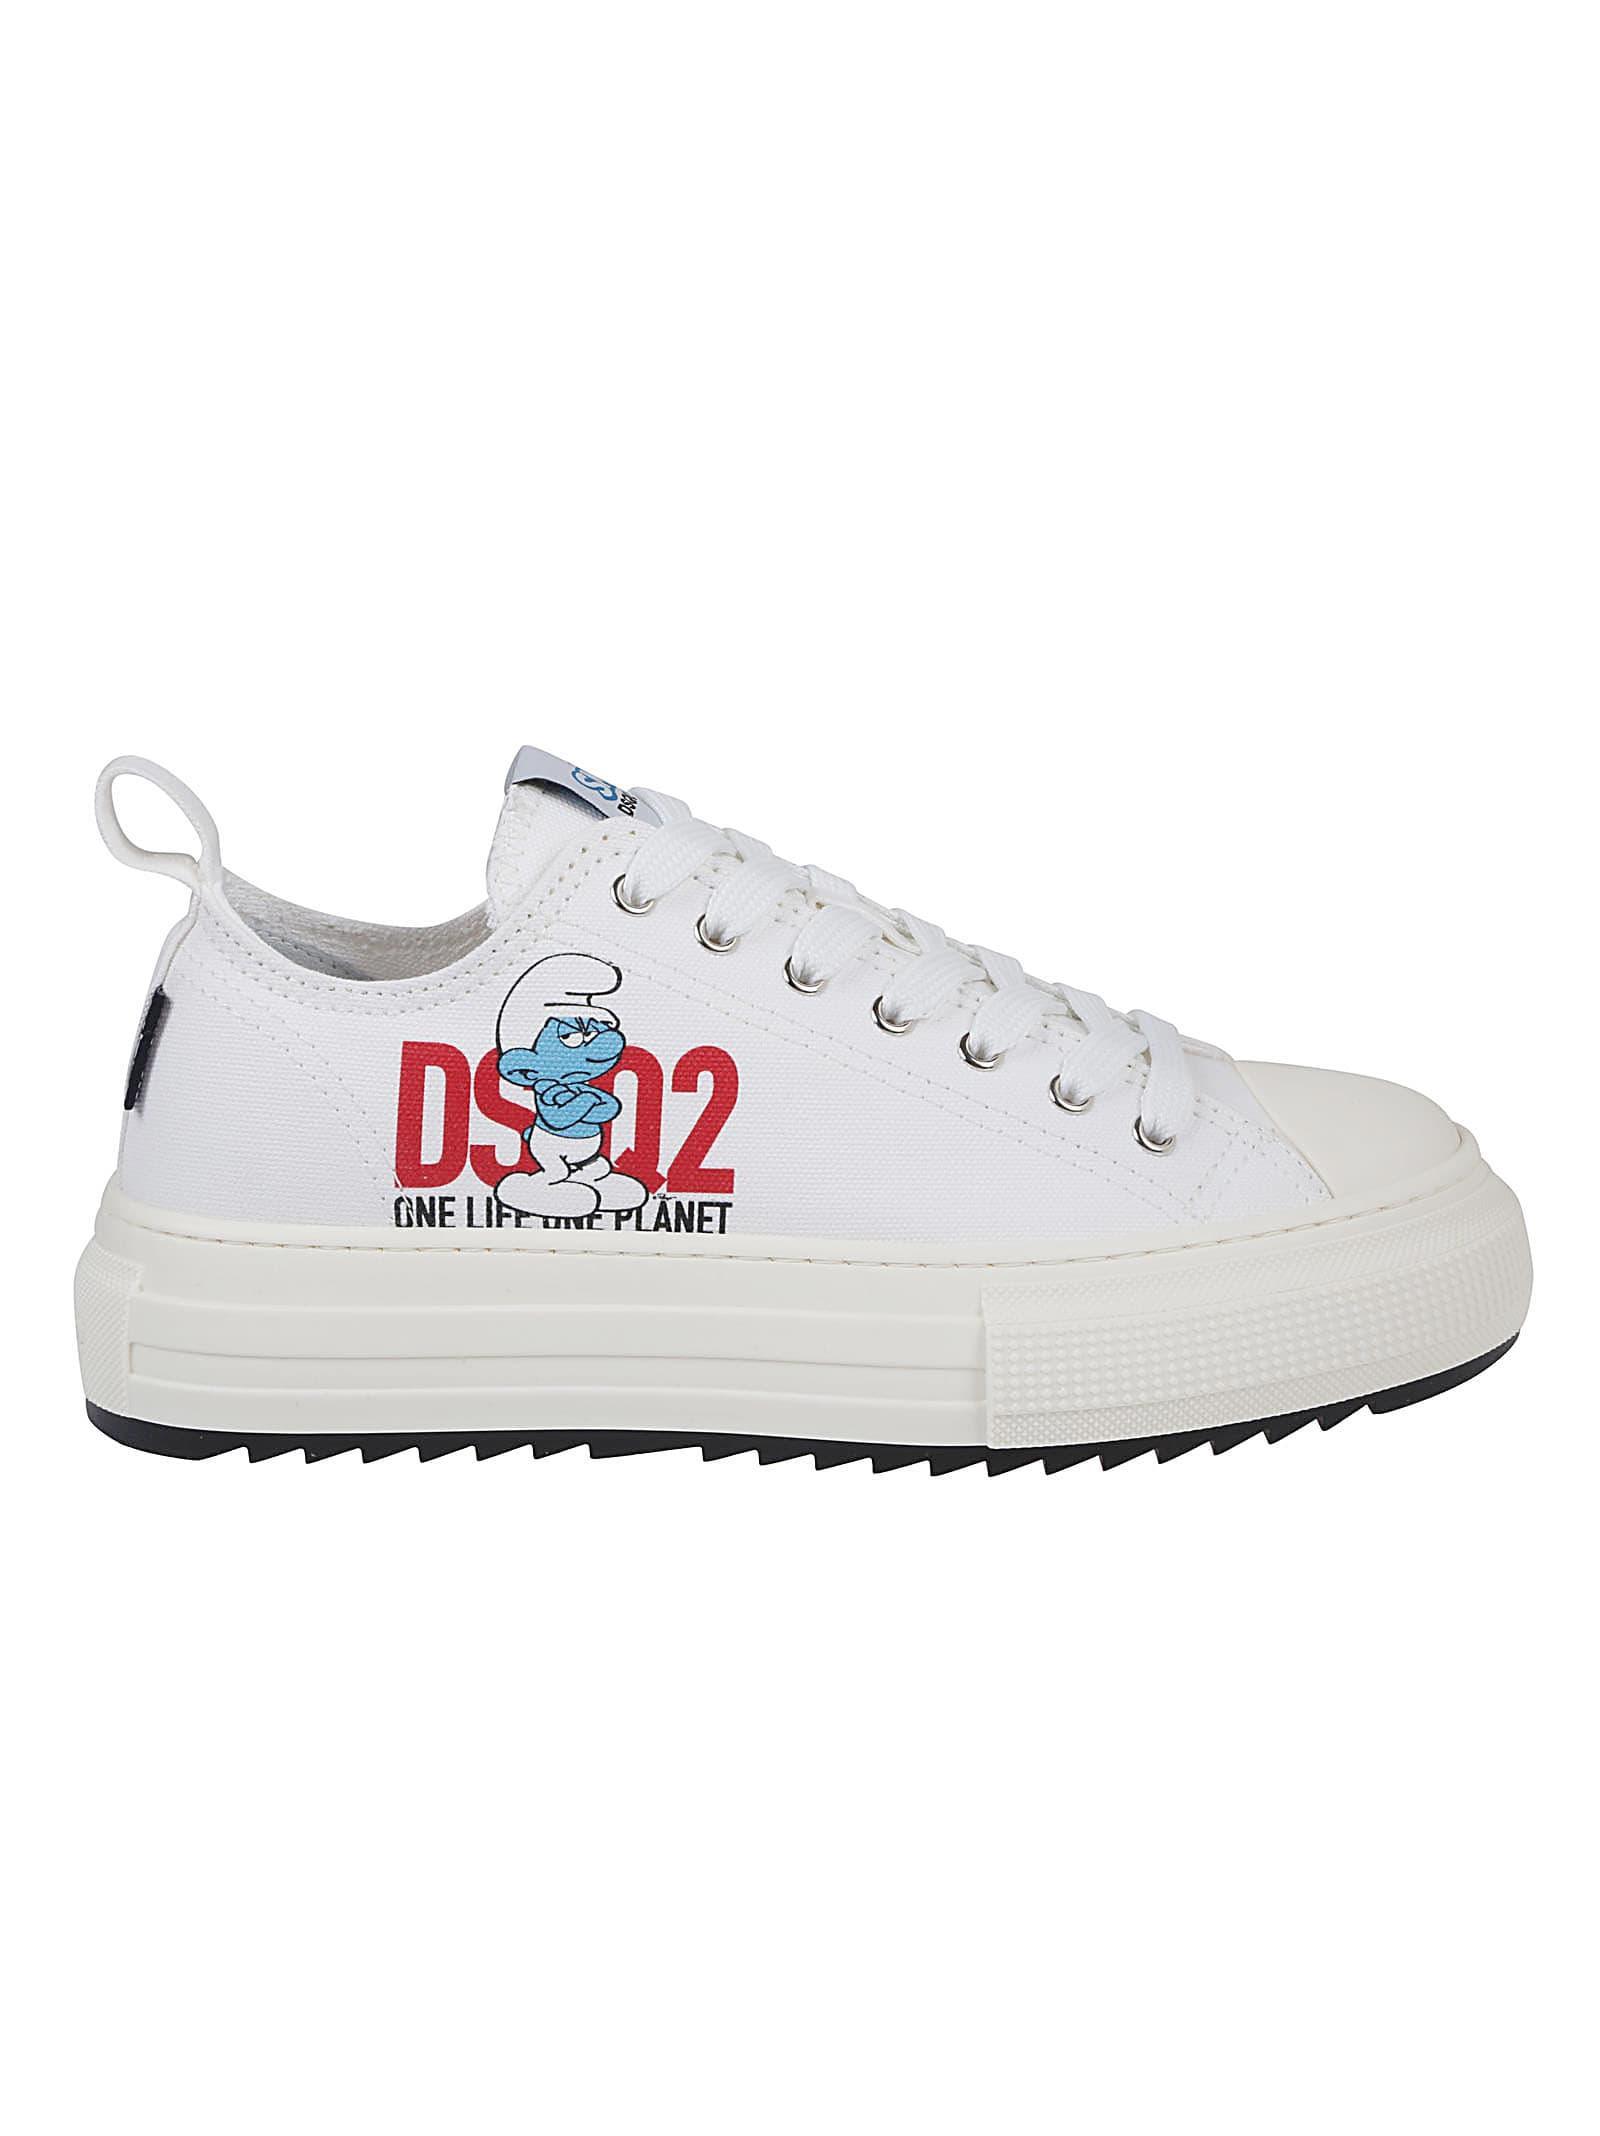 DSquared² Grouchy Smurf Sneakers in White for Men | Lyst